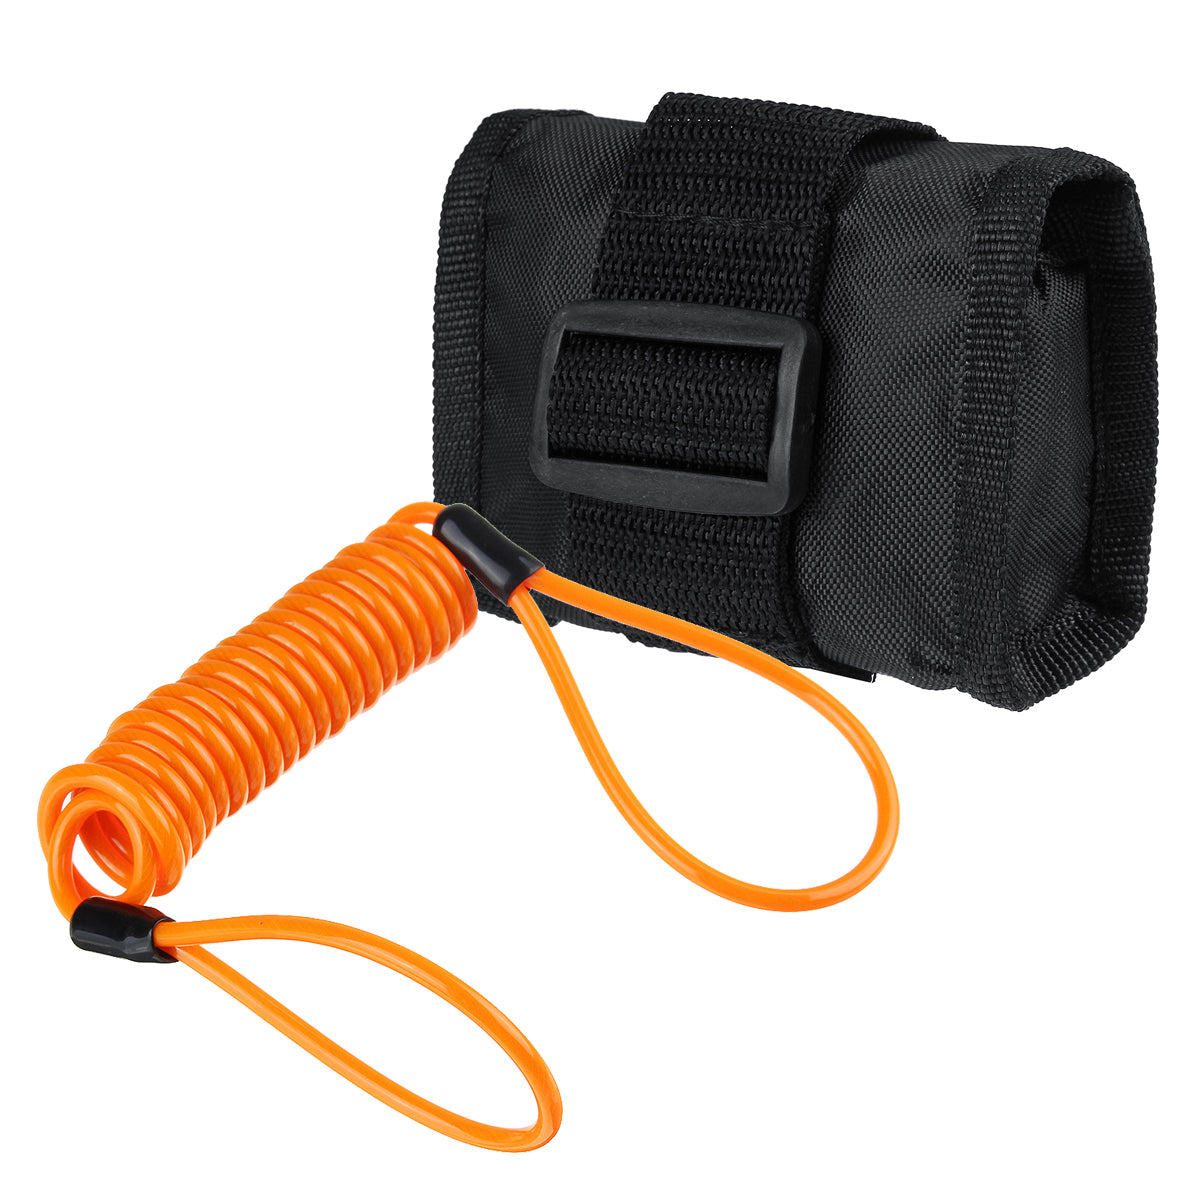 1.5m/5ft Reminder Cable With Alarm Lock Bag For Motorcycle Bike 5 Color - Auto GoShop